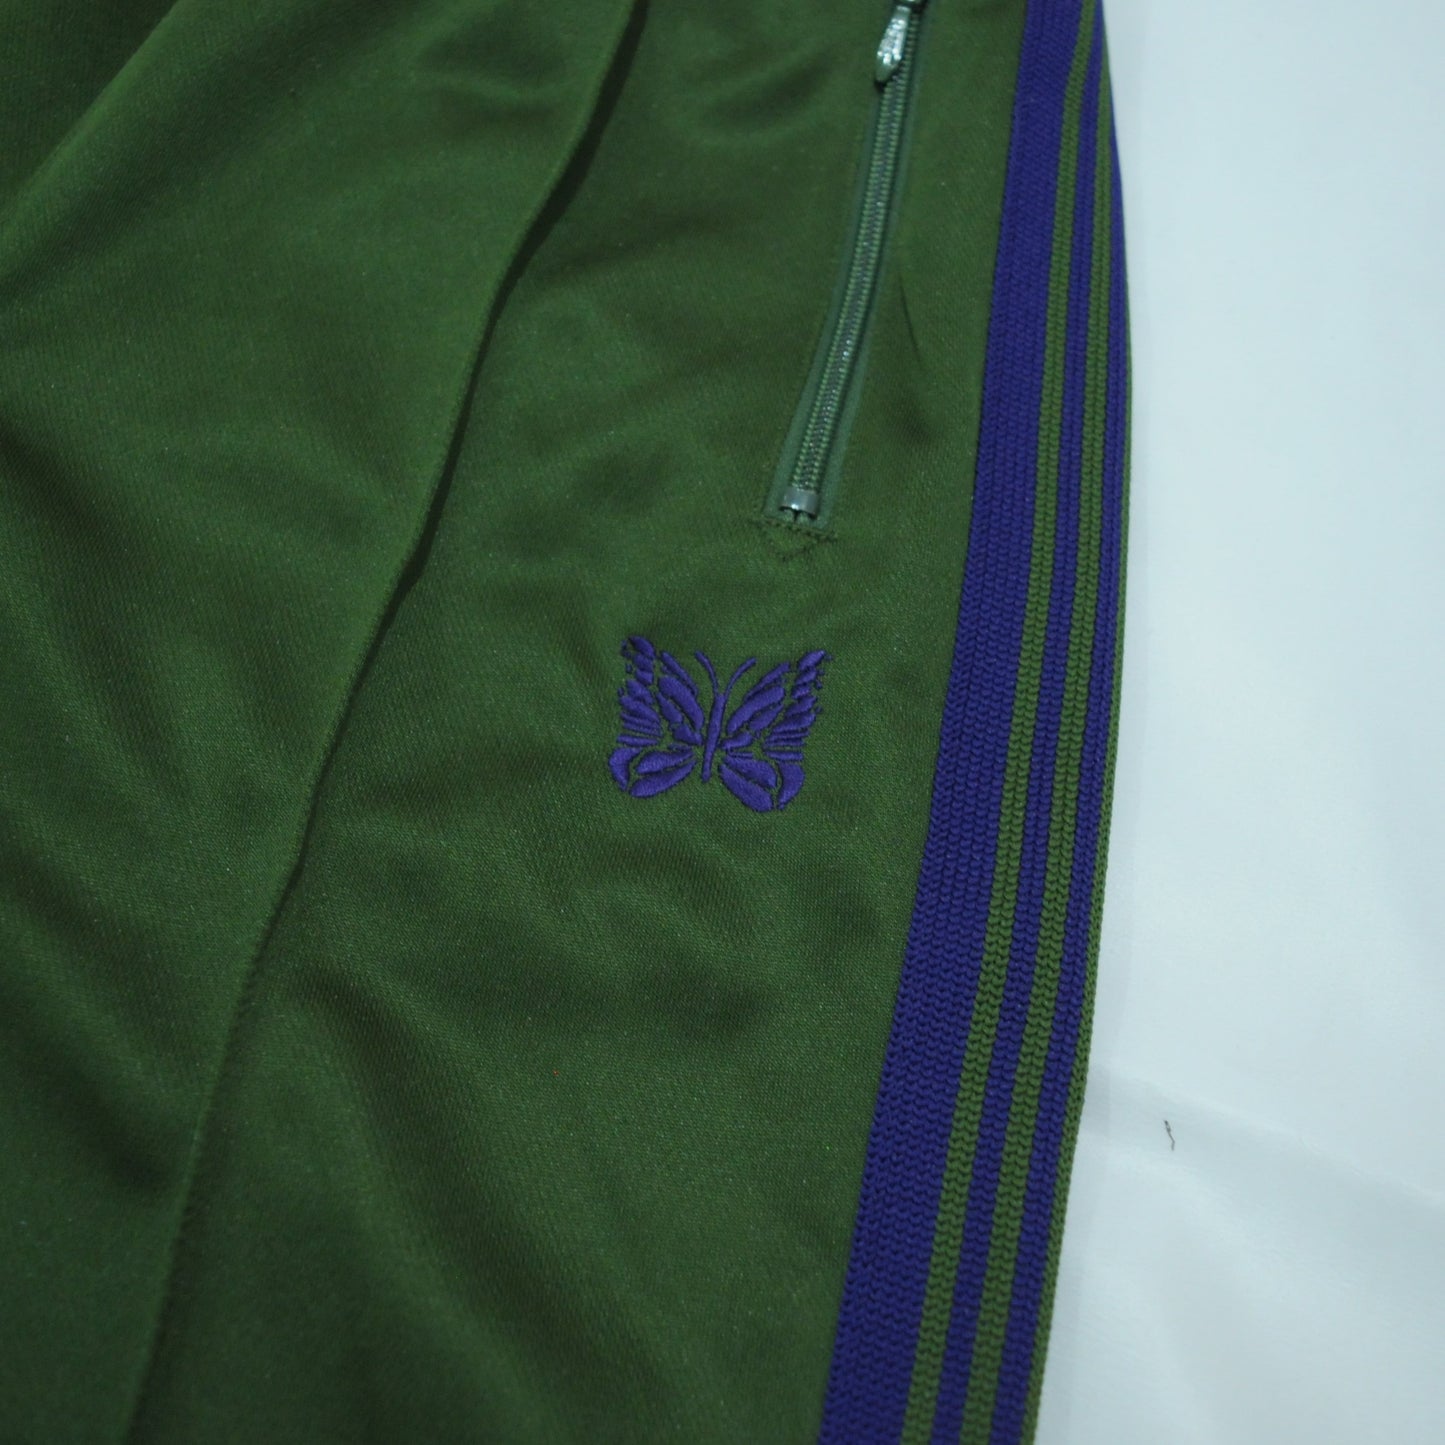 ZIPPED TRACK PANT - POLY SMOOTH-Green